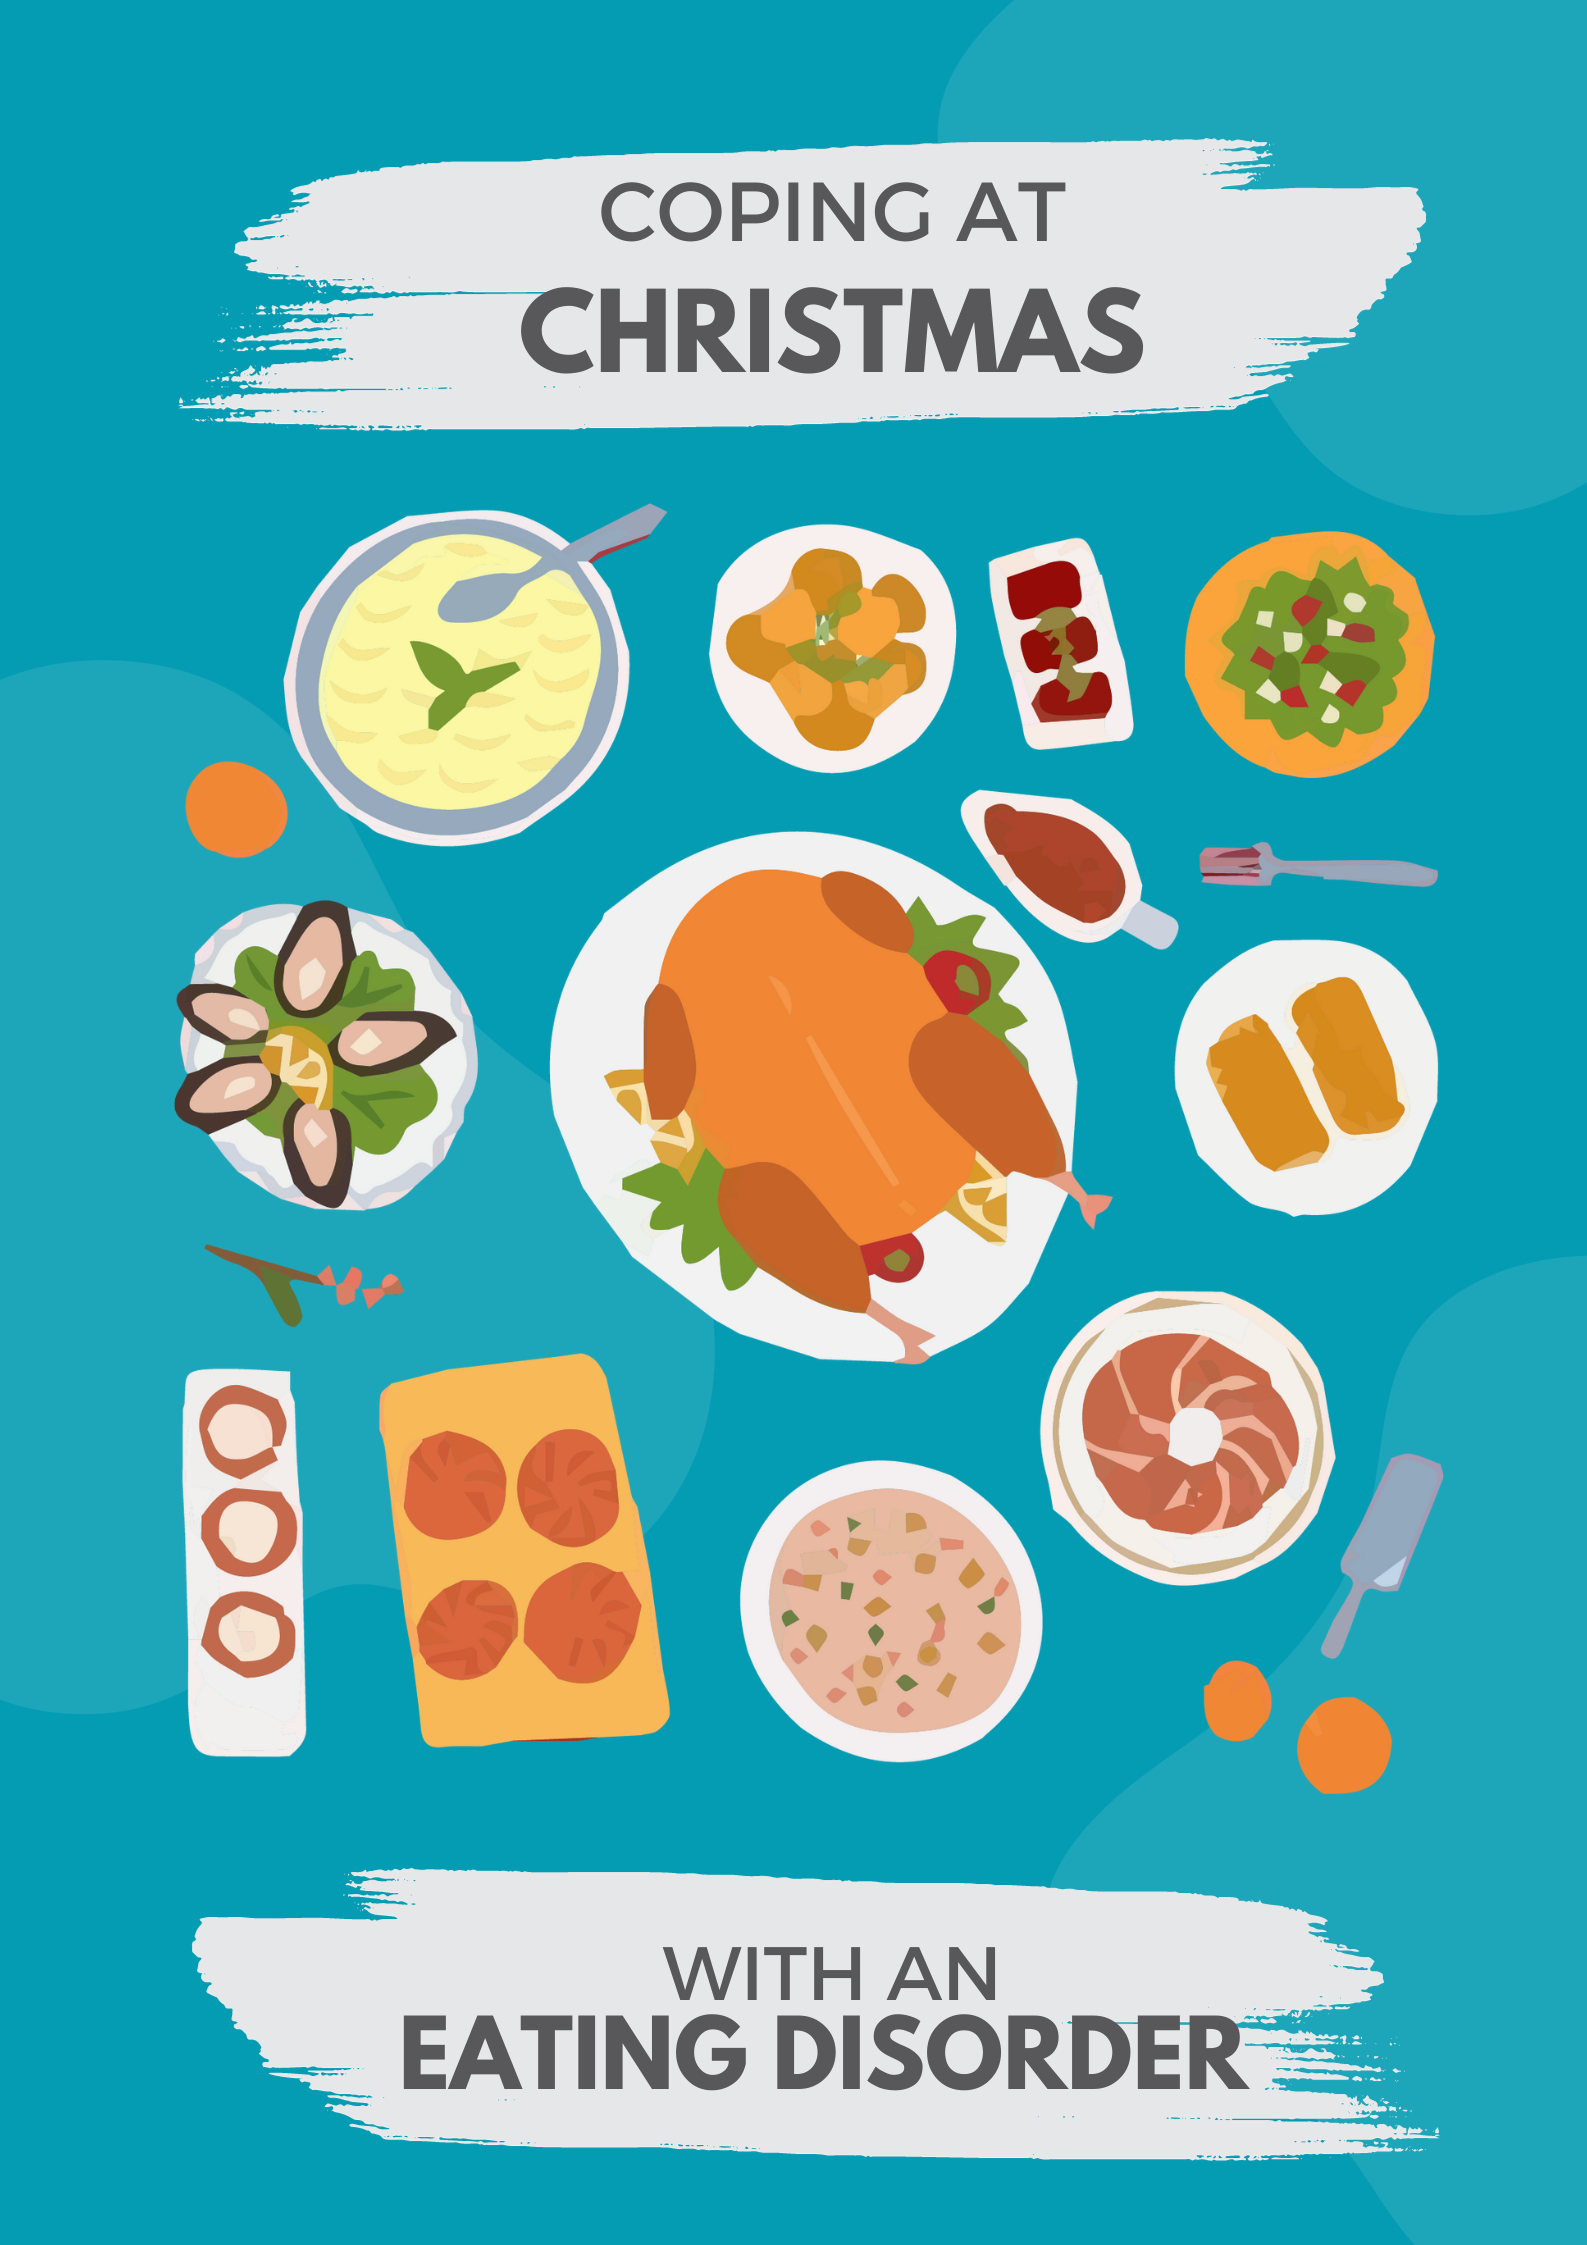 The top of the image says 'coping at Christmas' and the bottom says 'with an Eating Disorder'. In between the two sentences is different plates of food. There is a large turkey in the centre, surrounded by a gravy dish, mussels, mashed potato, bread, salad, roast potatoes, Christmas pudding, and other dishes which are not clear exactly what they are. 